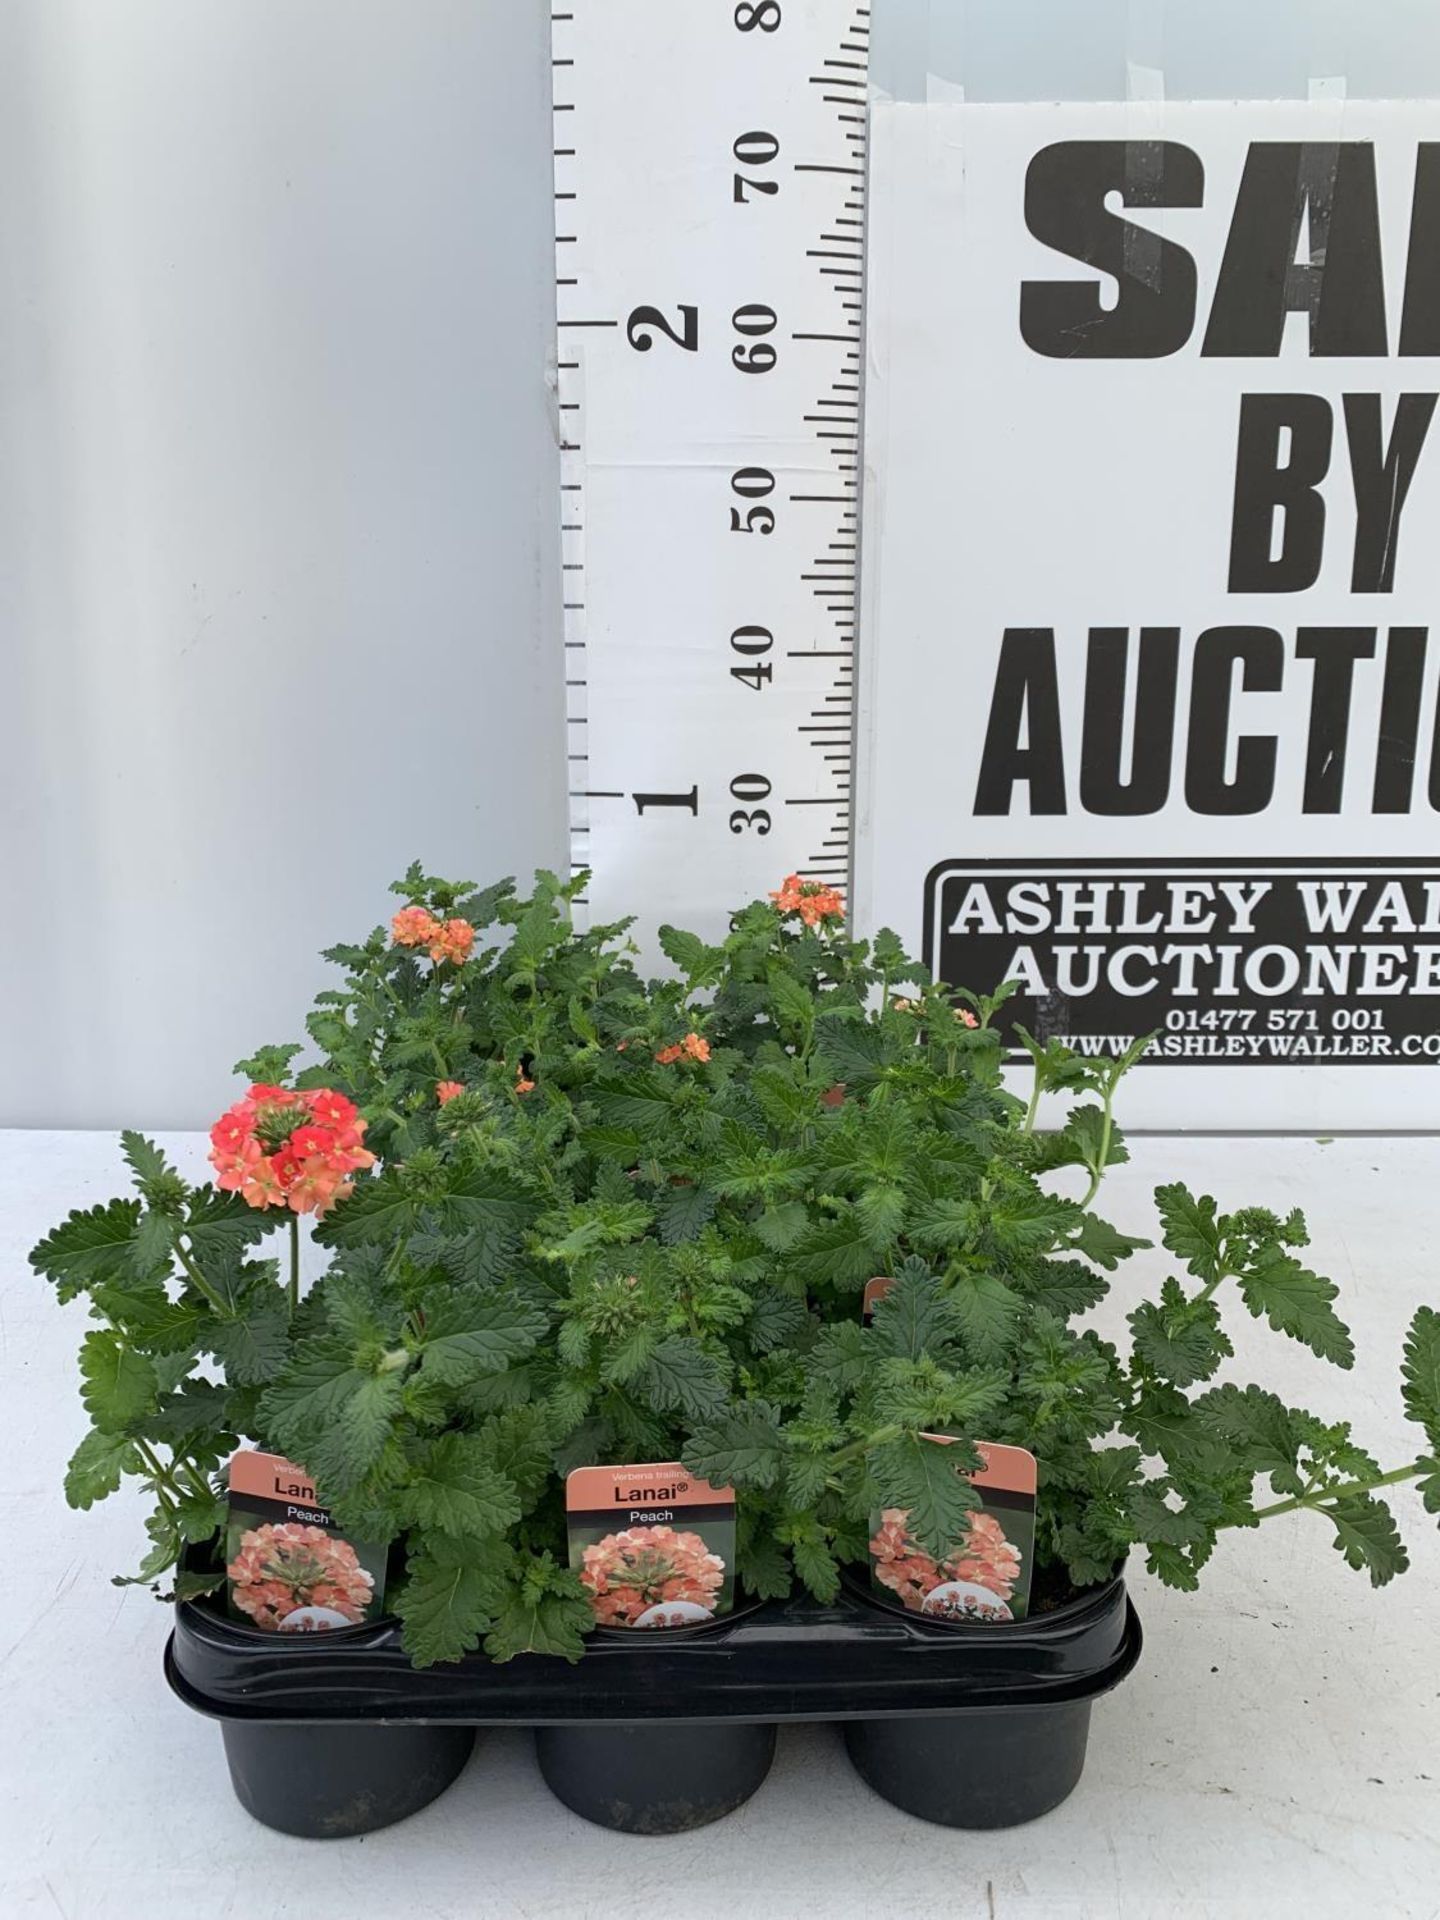 FIFTEEN TRAILING VERBENA LANAI IN PEACH BASKET PLANTS IN P9 POTS PLUS VAT TO BE SOLD FOR THE FIFTEEN